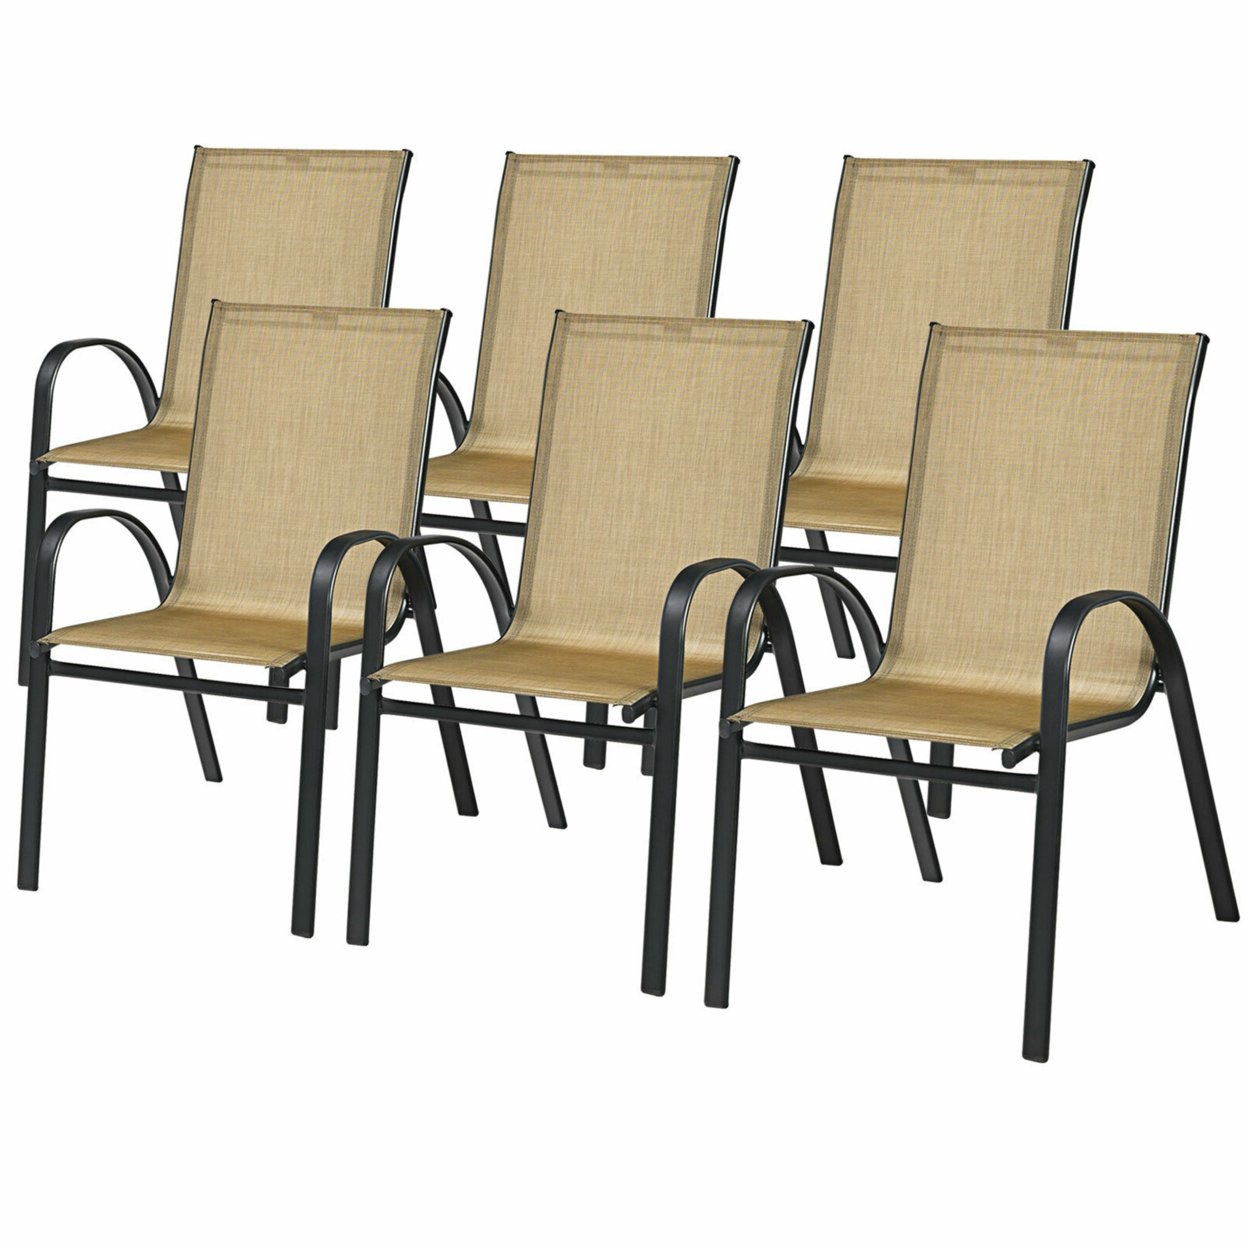 Gymax Patio Dining Chair Outdoor Stackable Armchair W/ Breathable Fabric - 6 Pcs